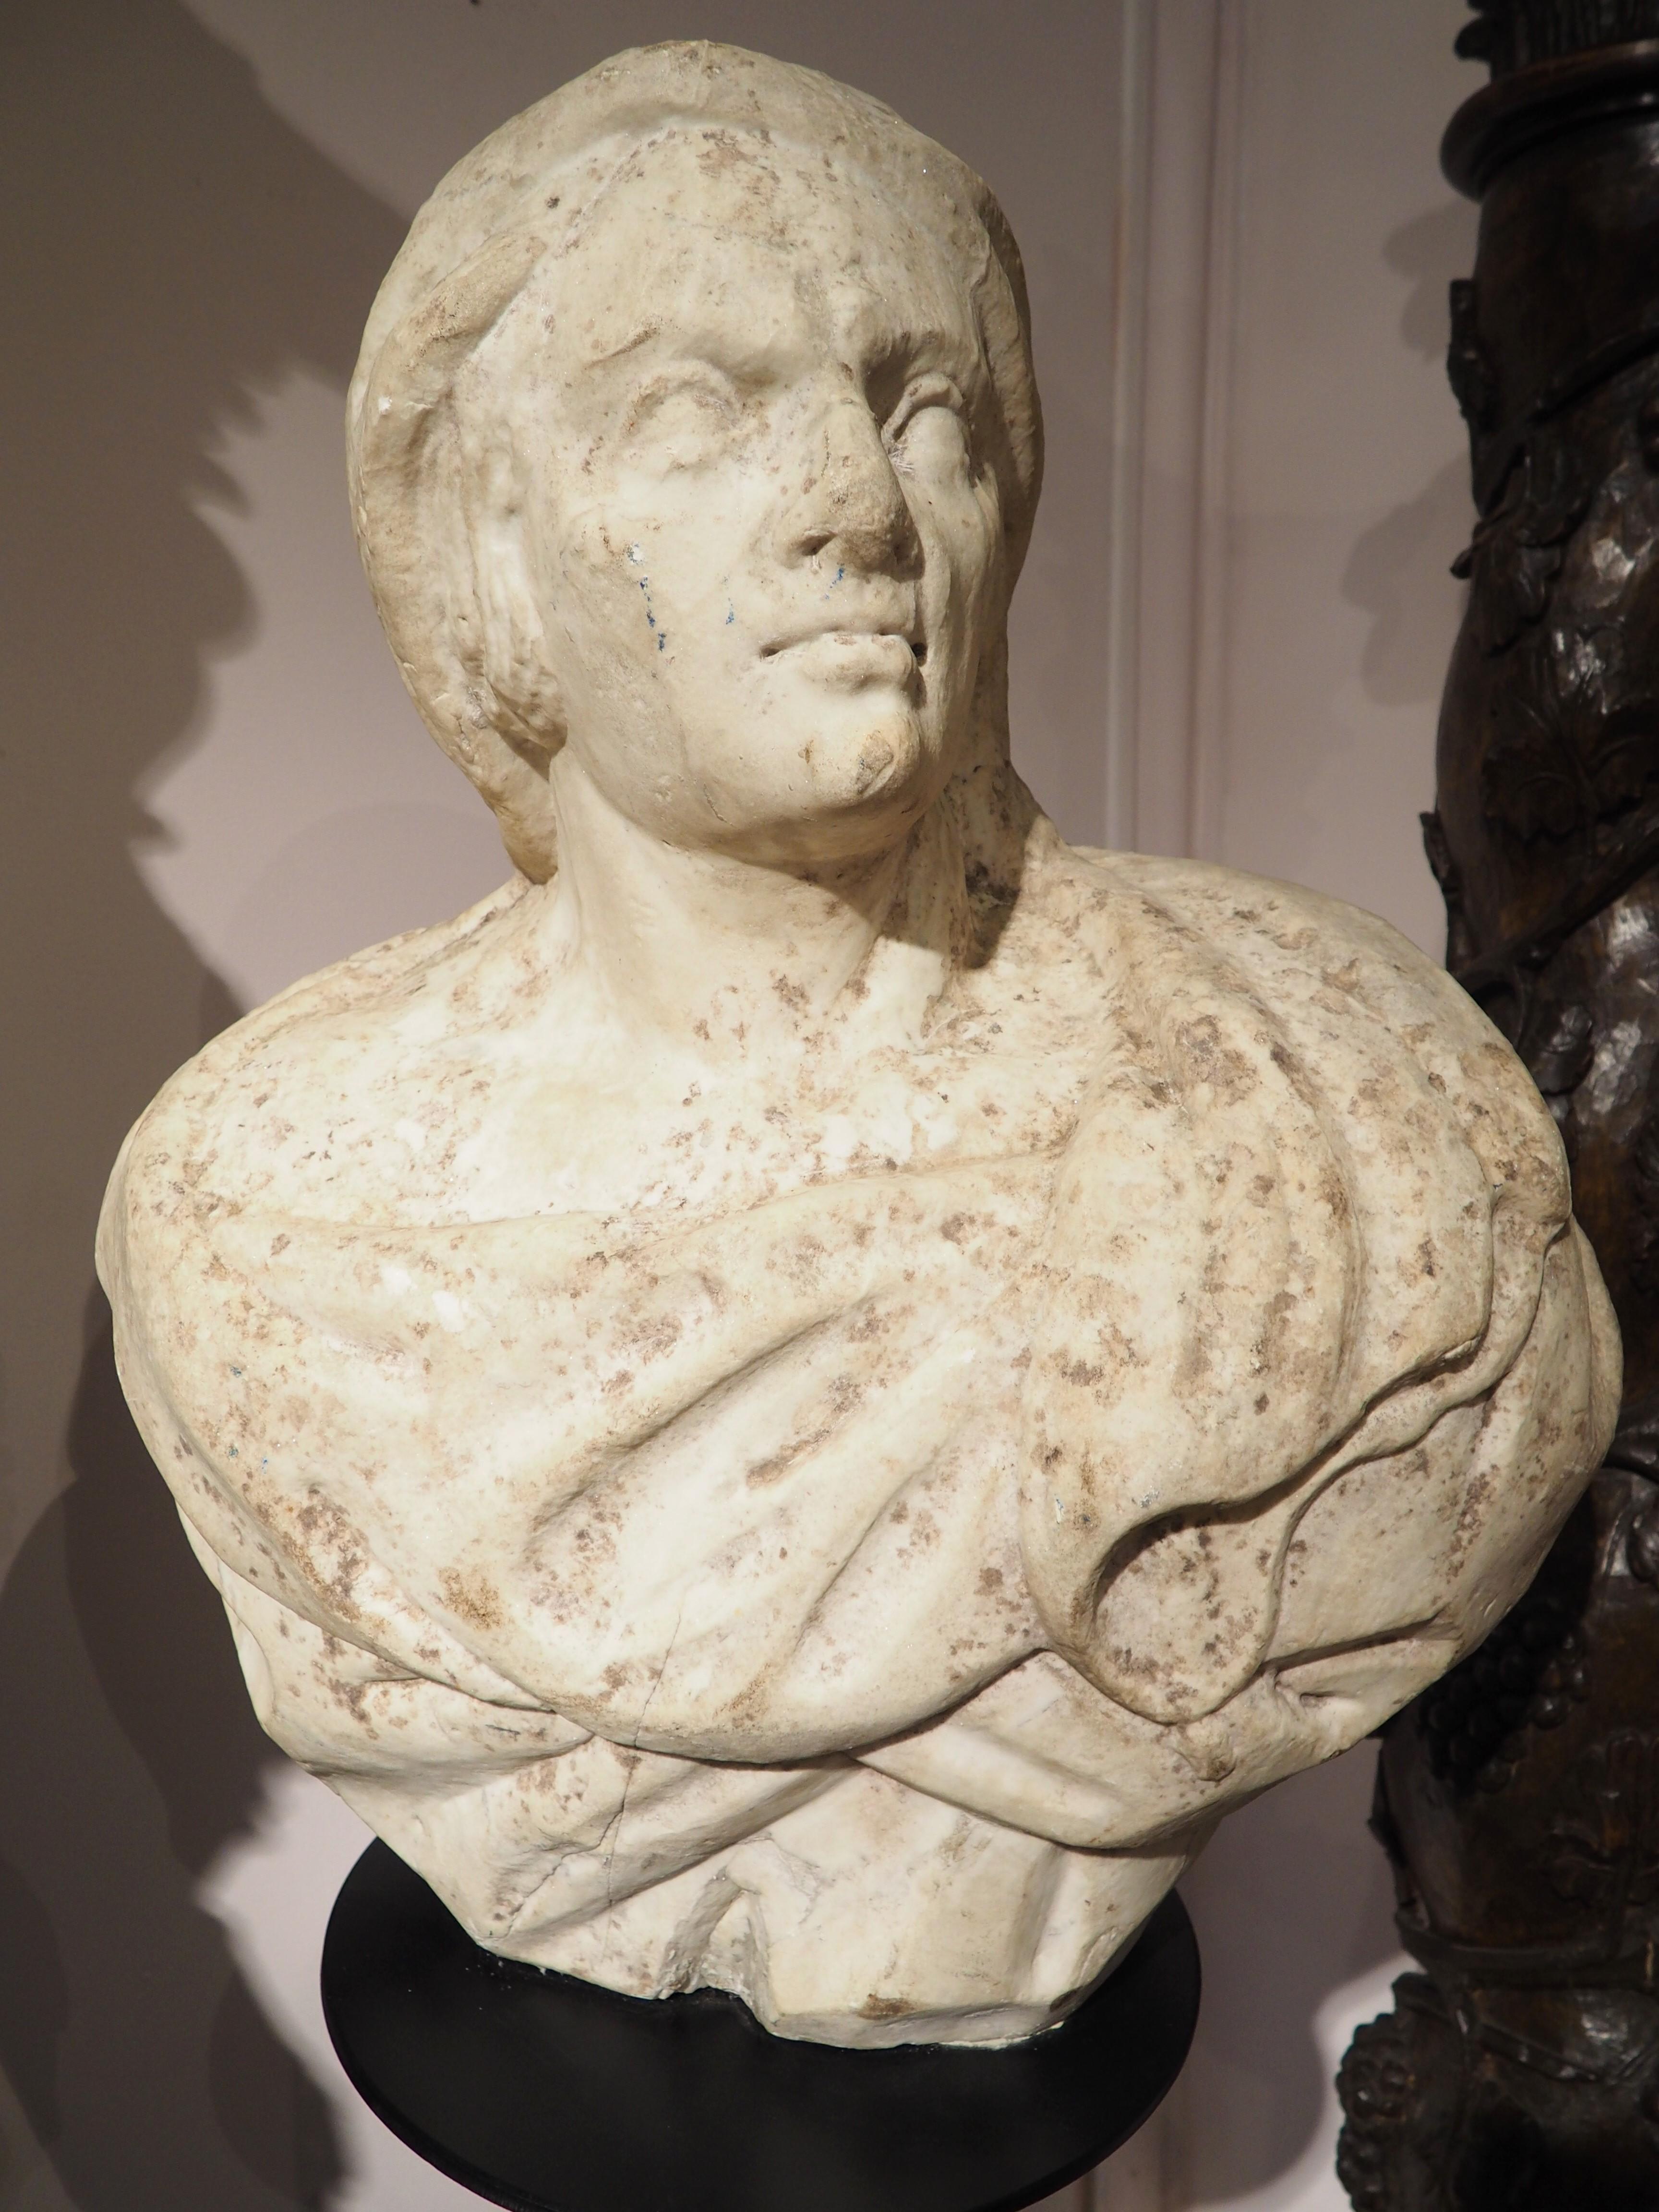 Salvaged from a villa on the Amalfi Coast in Southern Italy, this beautiful marble bust was hand-carved in the 1600’s. Our subject has a cloak wrapped around his shoulders and is depicted looking slightly to his left and upwards. The bust sits atop